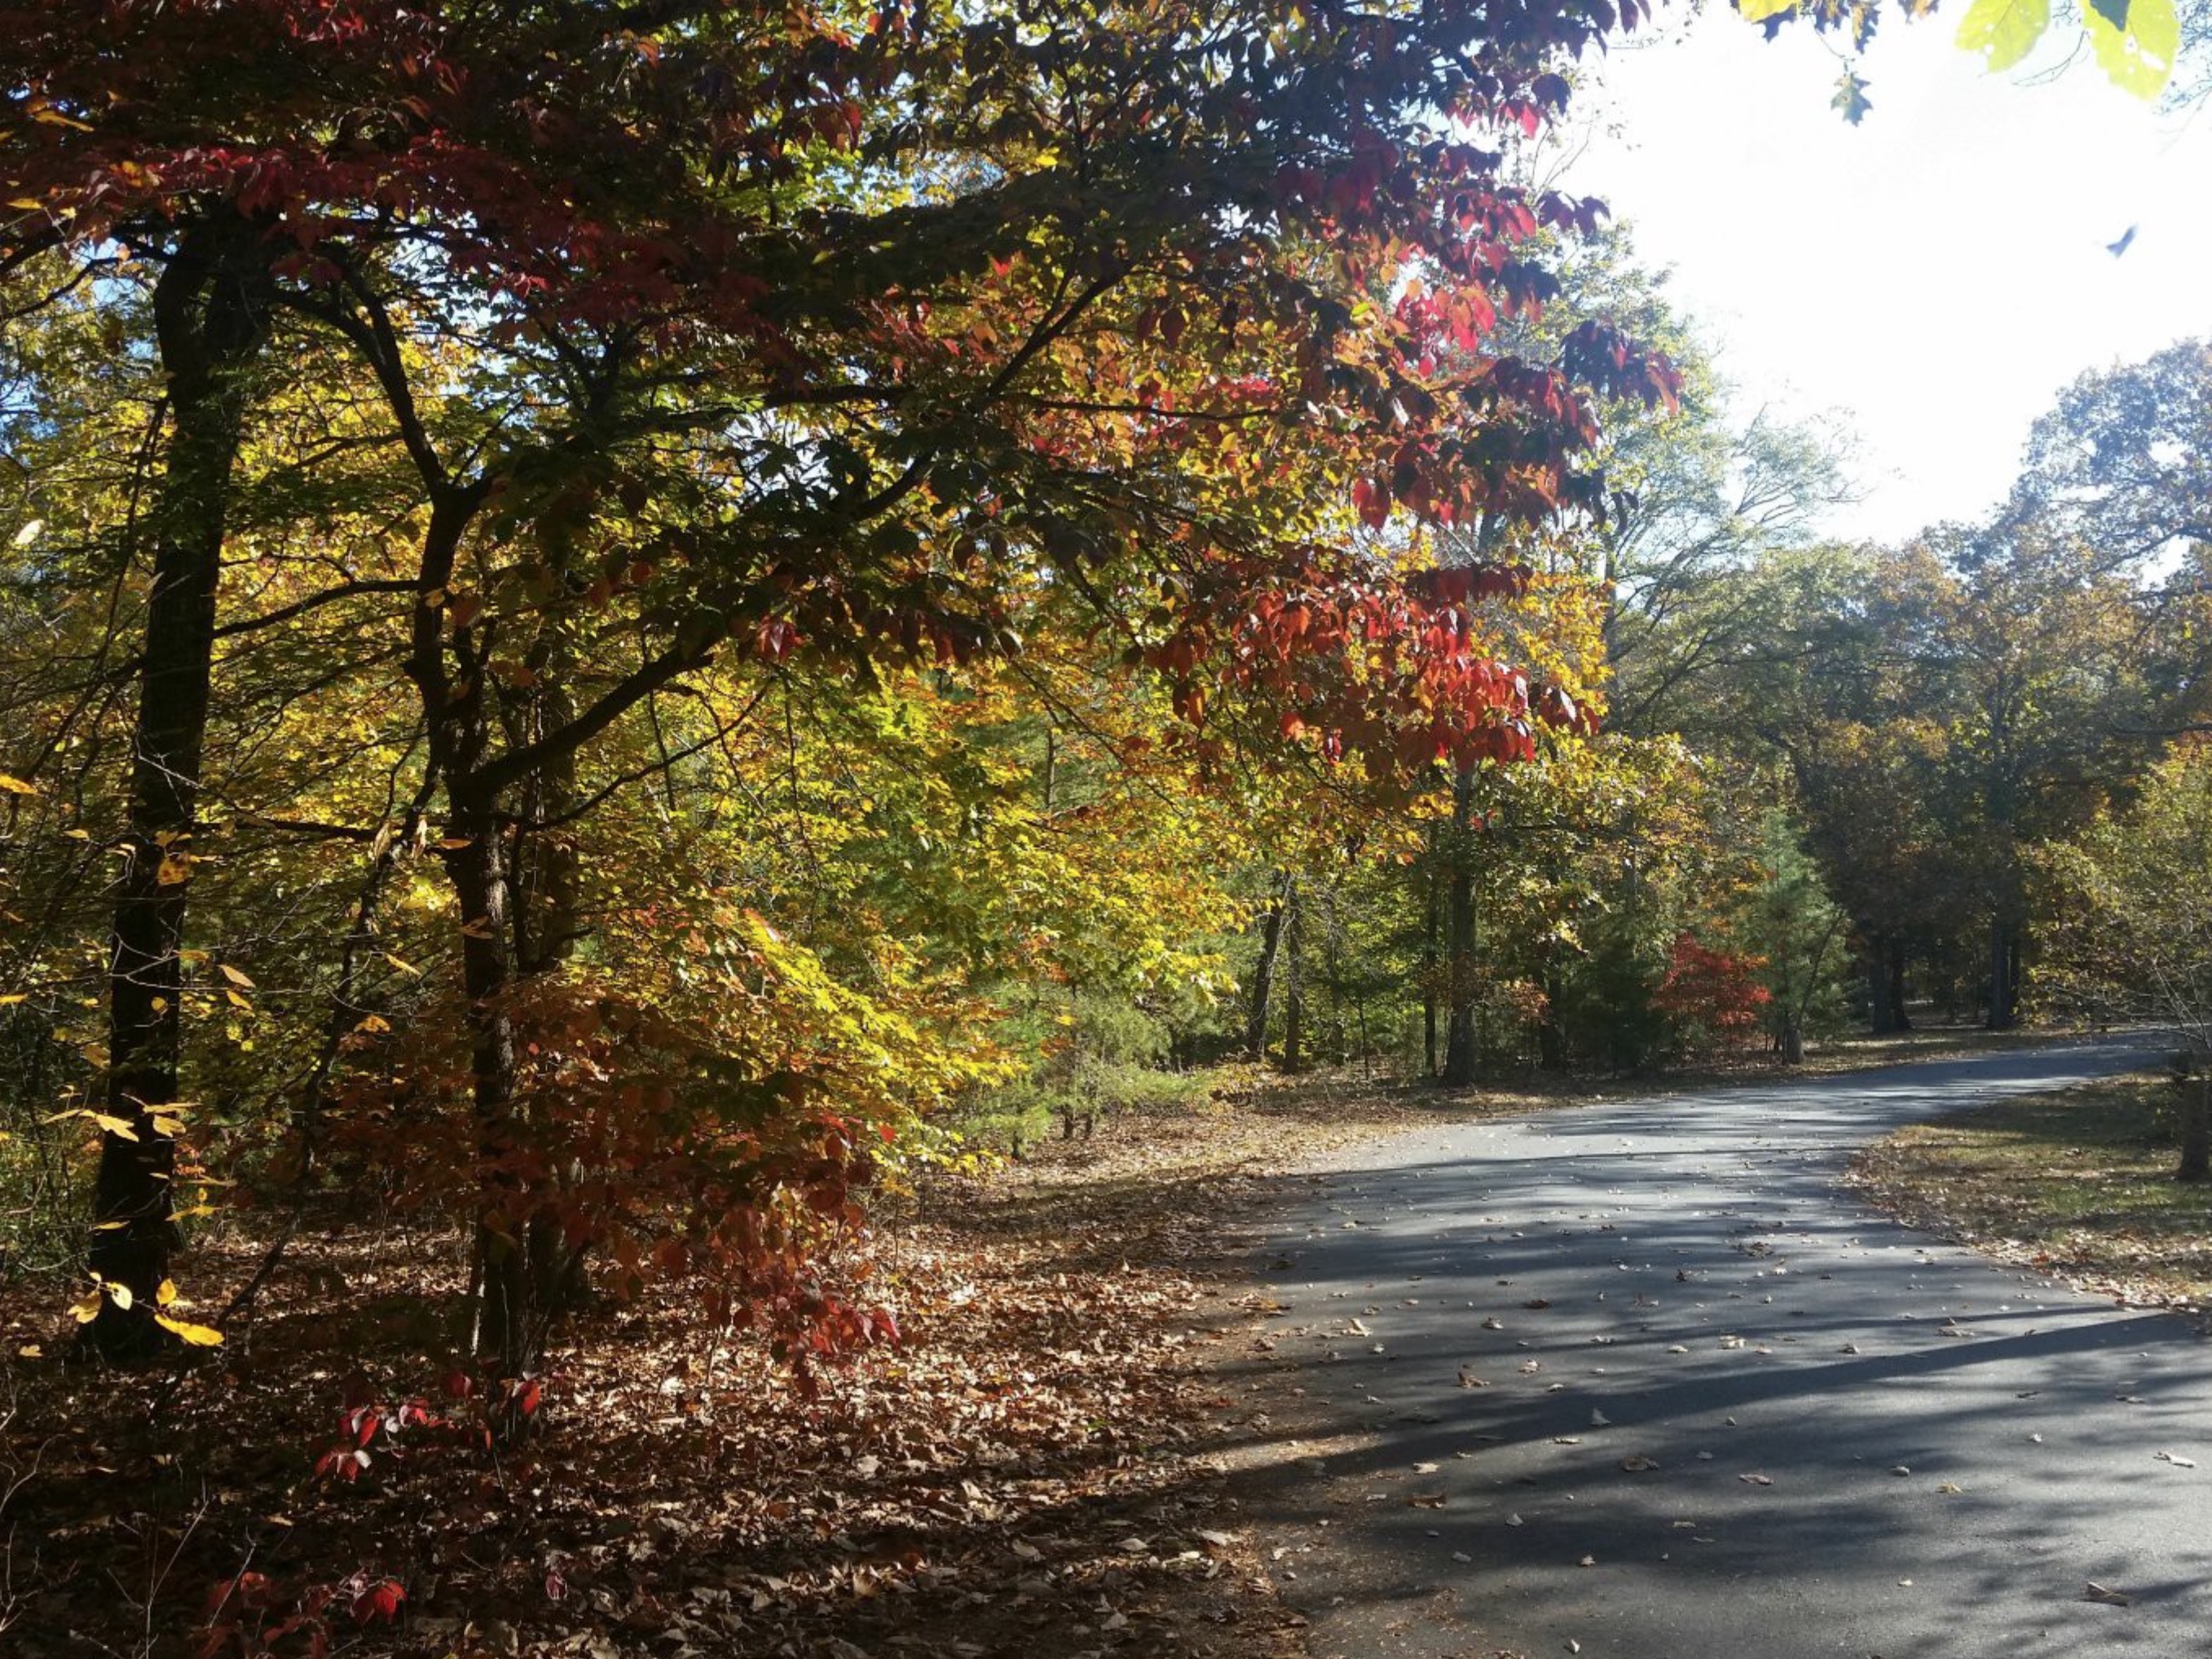 Colors of fall foliage along a road winding through the trees.